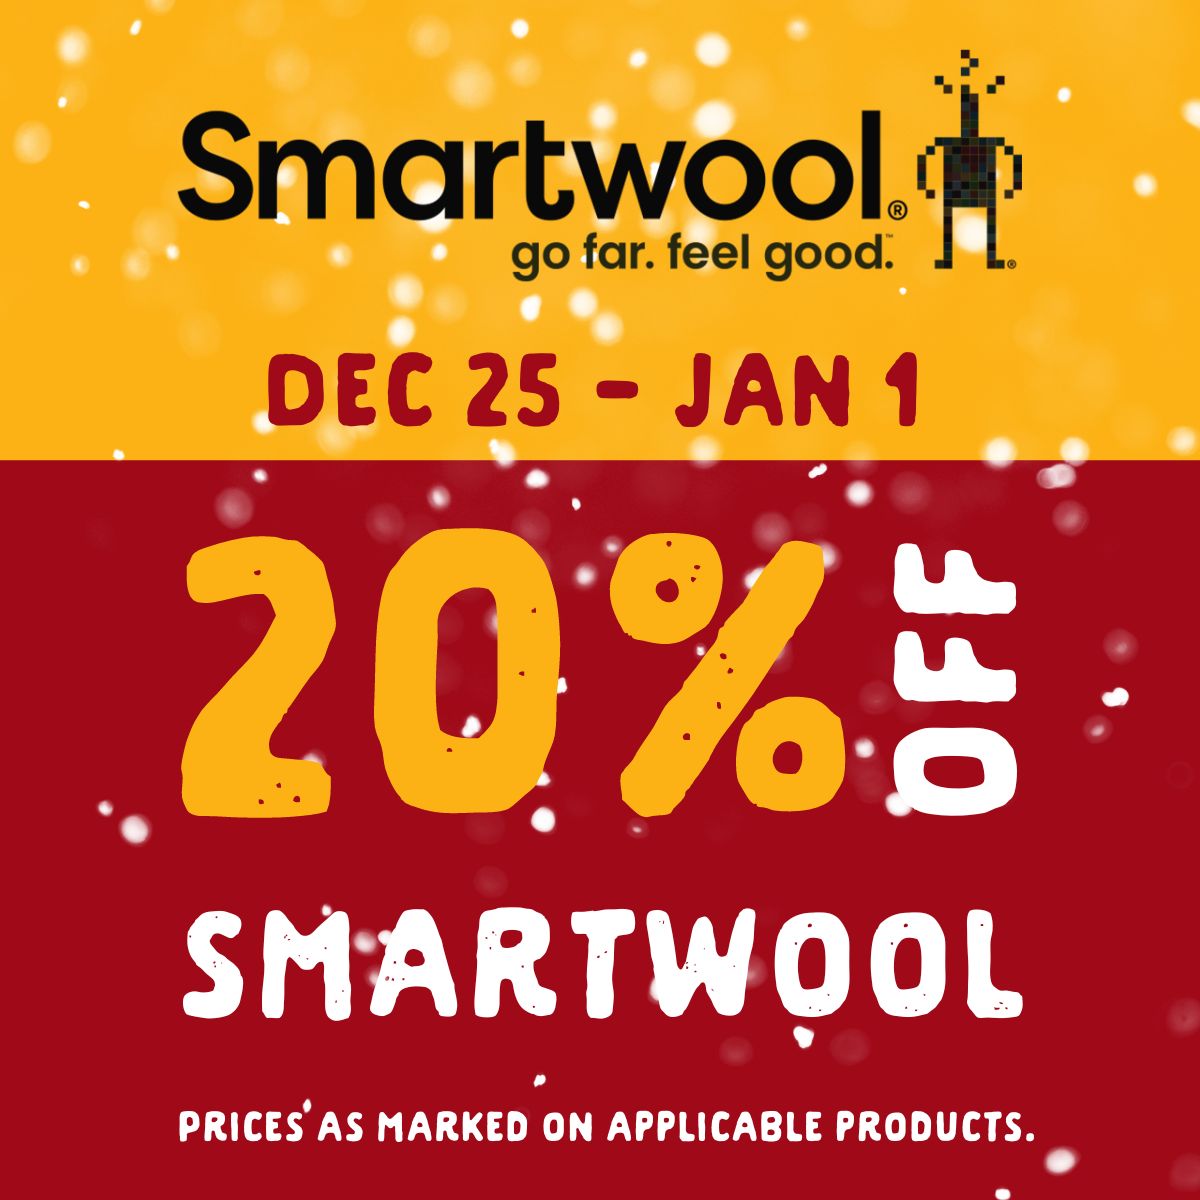 20% off Smartwool from December 25 until January 1. Prices as marked on applicable products.